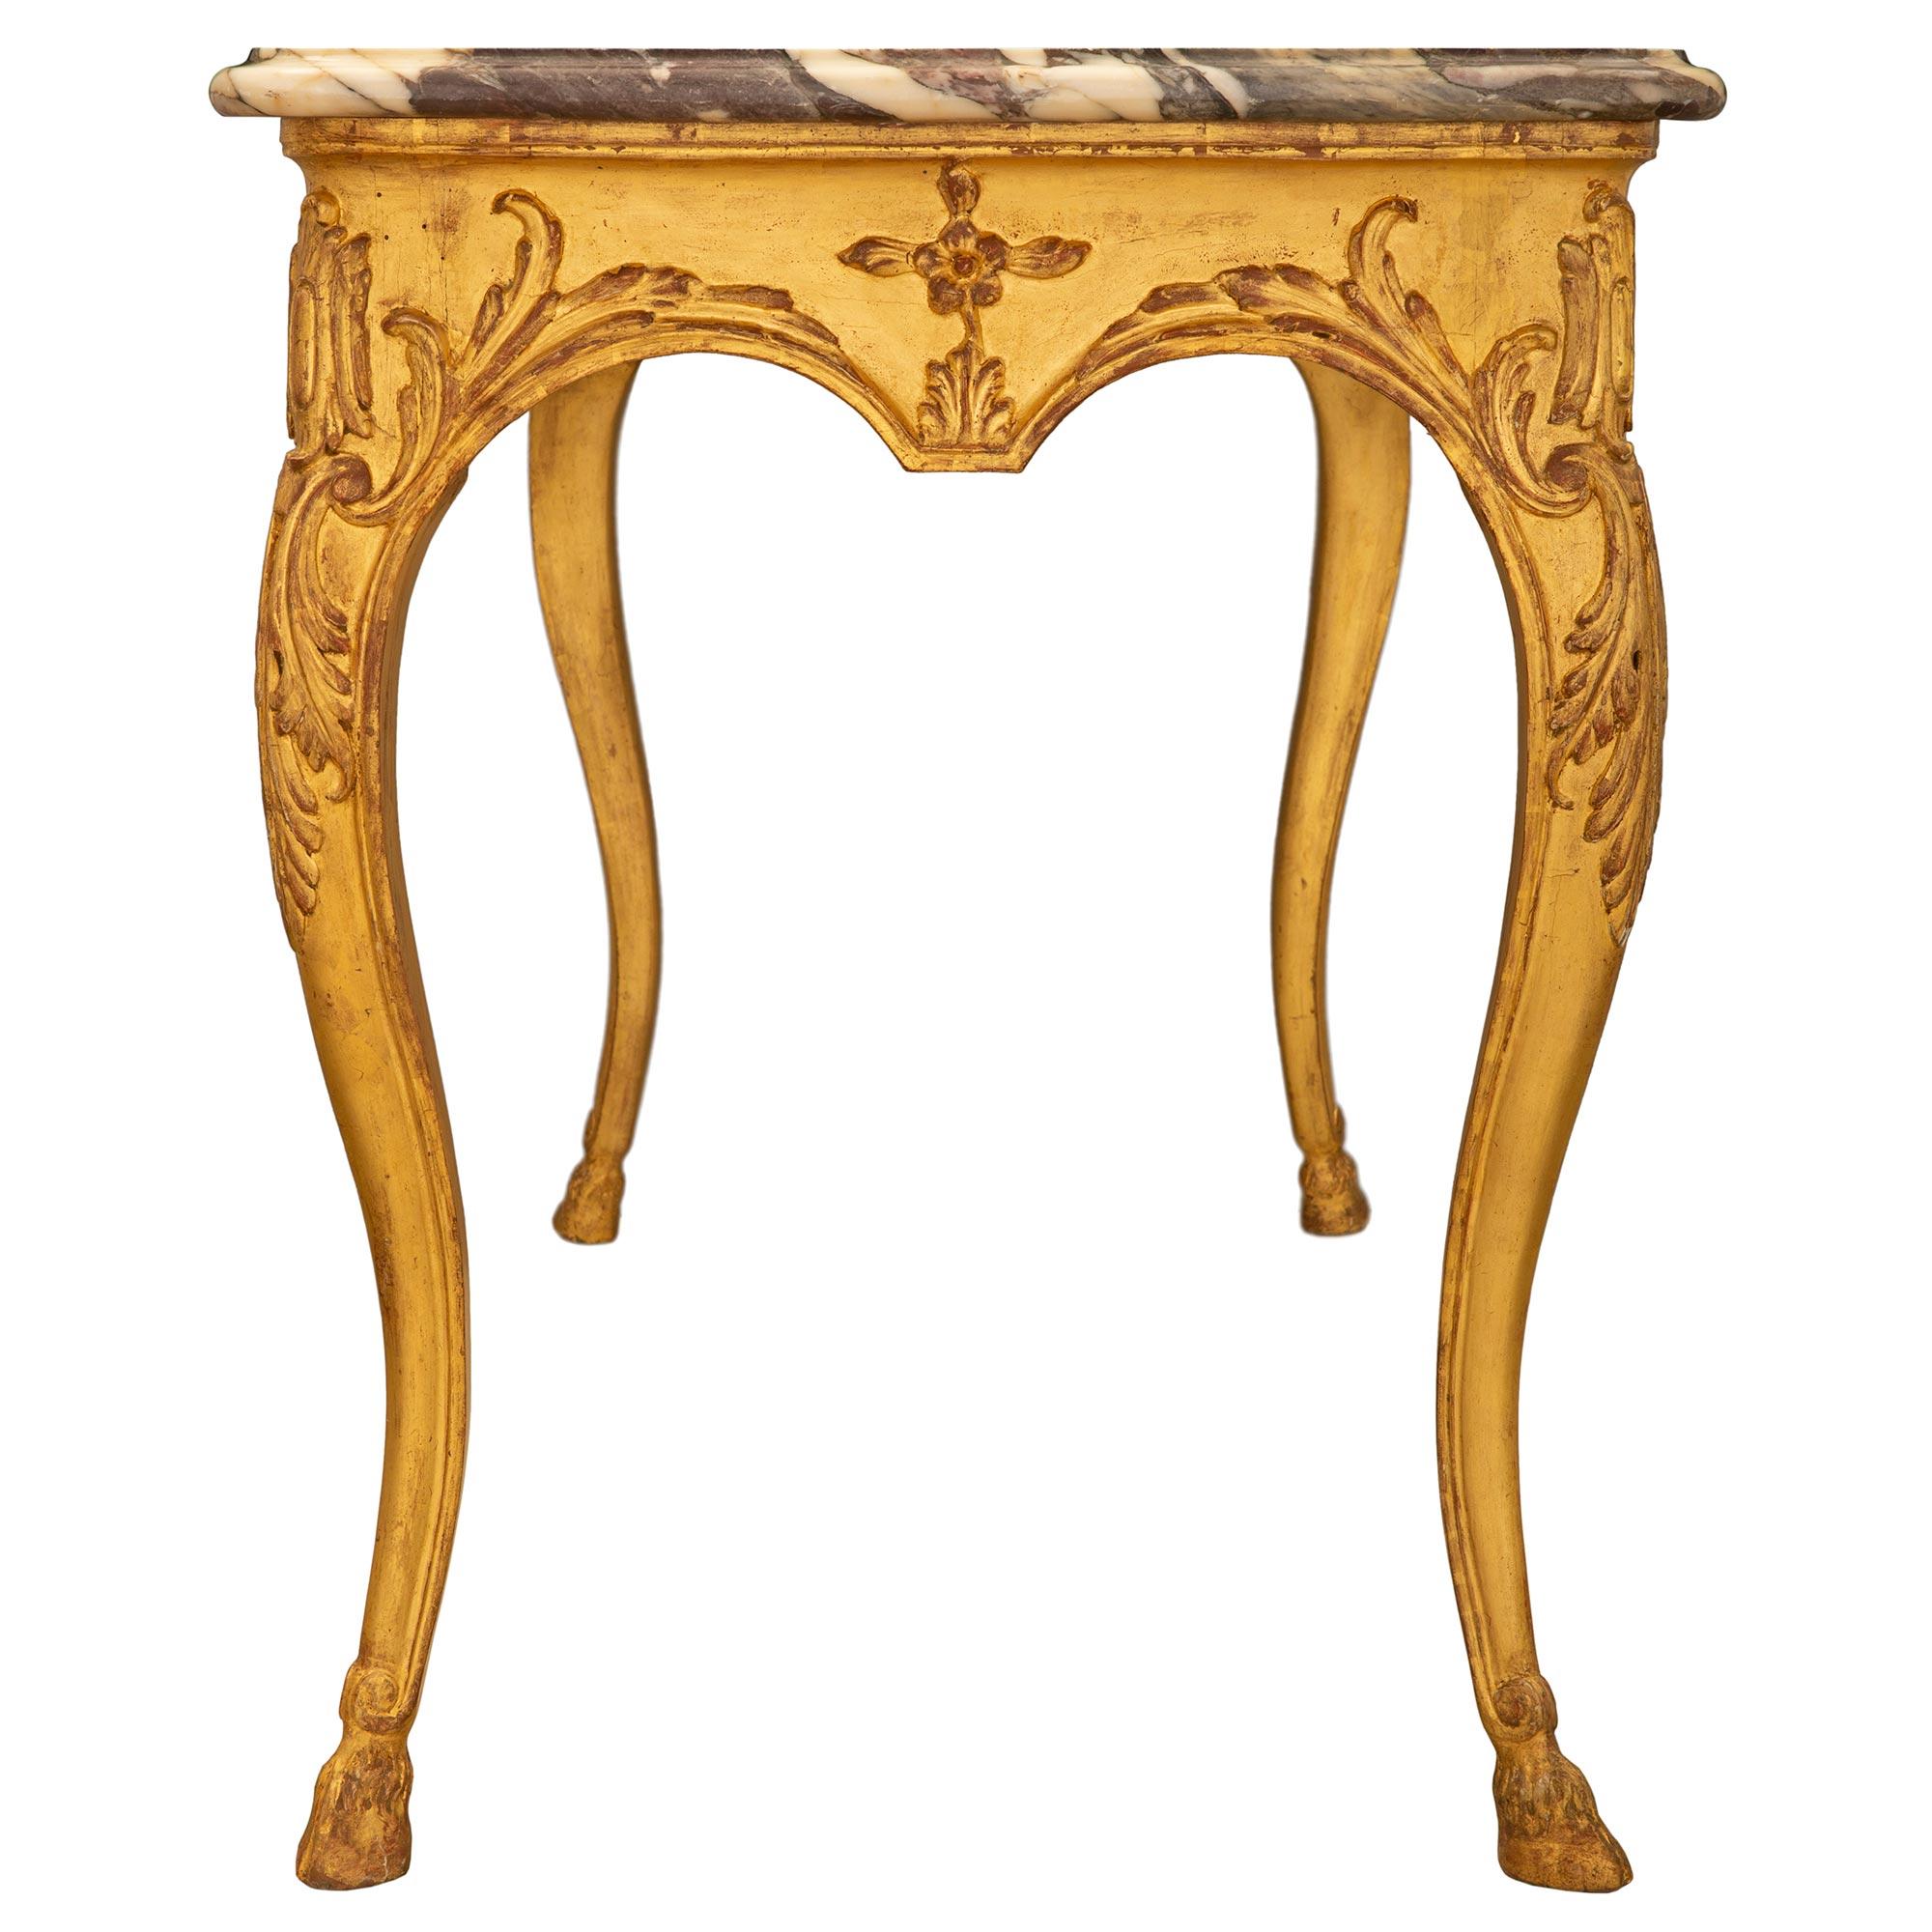 18th Century and Earlier Italian Mid-18th Century Louis XV Period Giltwood and Marble Center Table For Sale